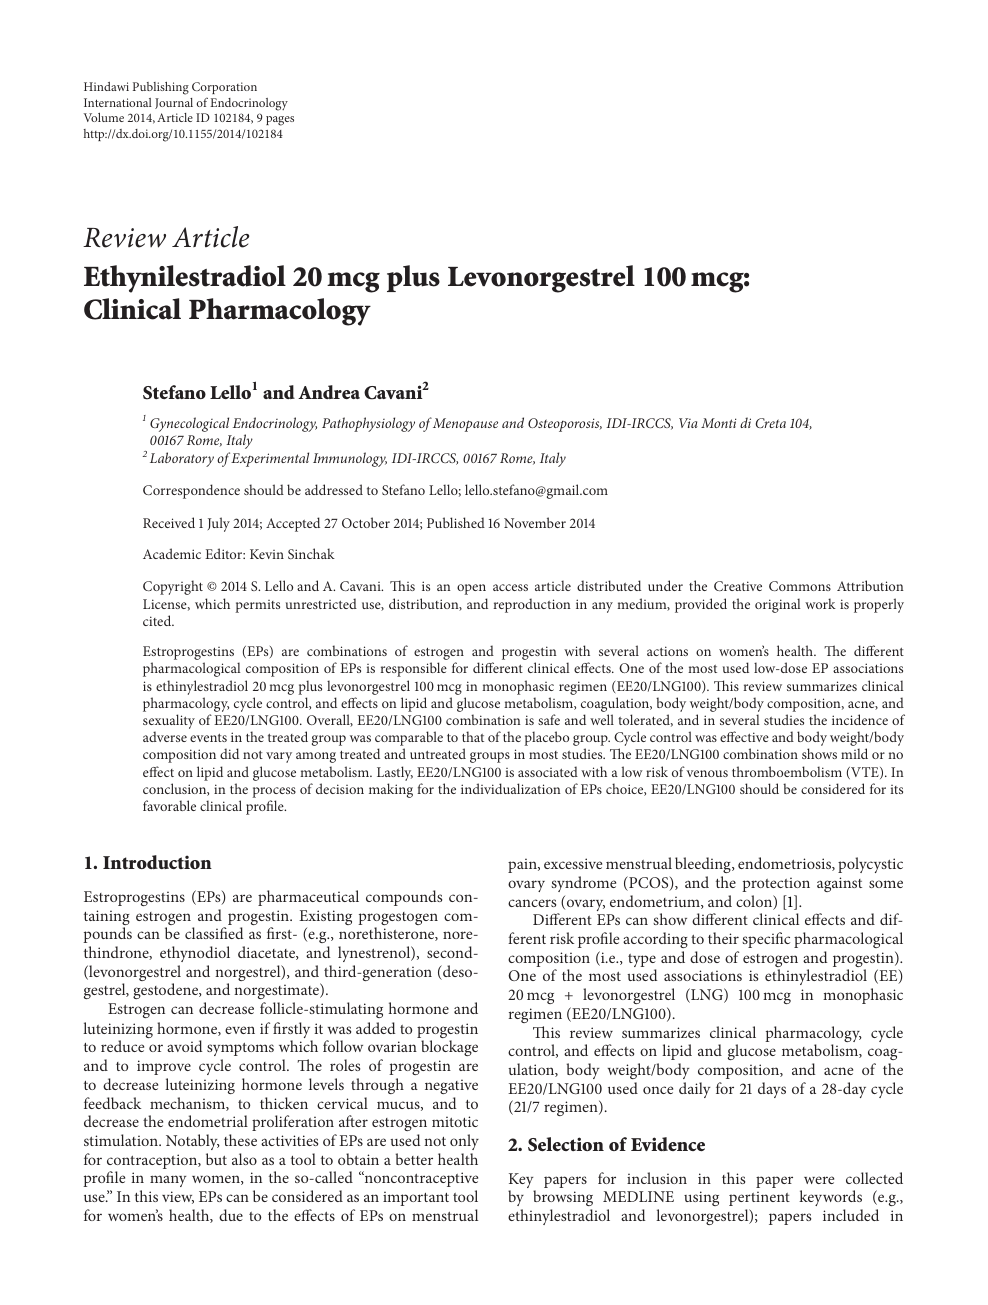 Ethynilestradiol Mcg Plus Levonorgestrel 100 Mcg Clinical Pharmacology Topic Of Research Paper In Veterinary Science Download Scholarly Article Pdf And Read For Free On Cyberleninka Open Science Hub